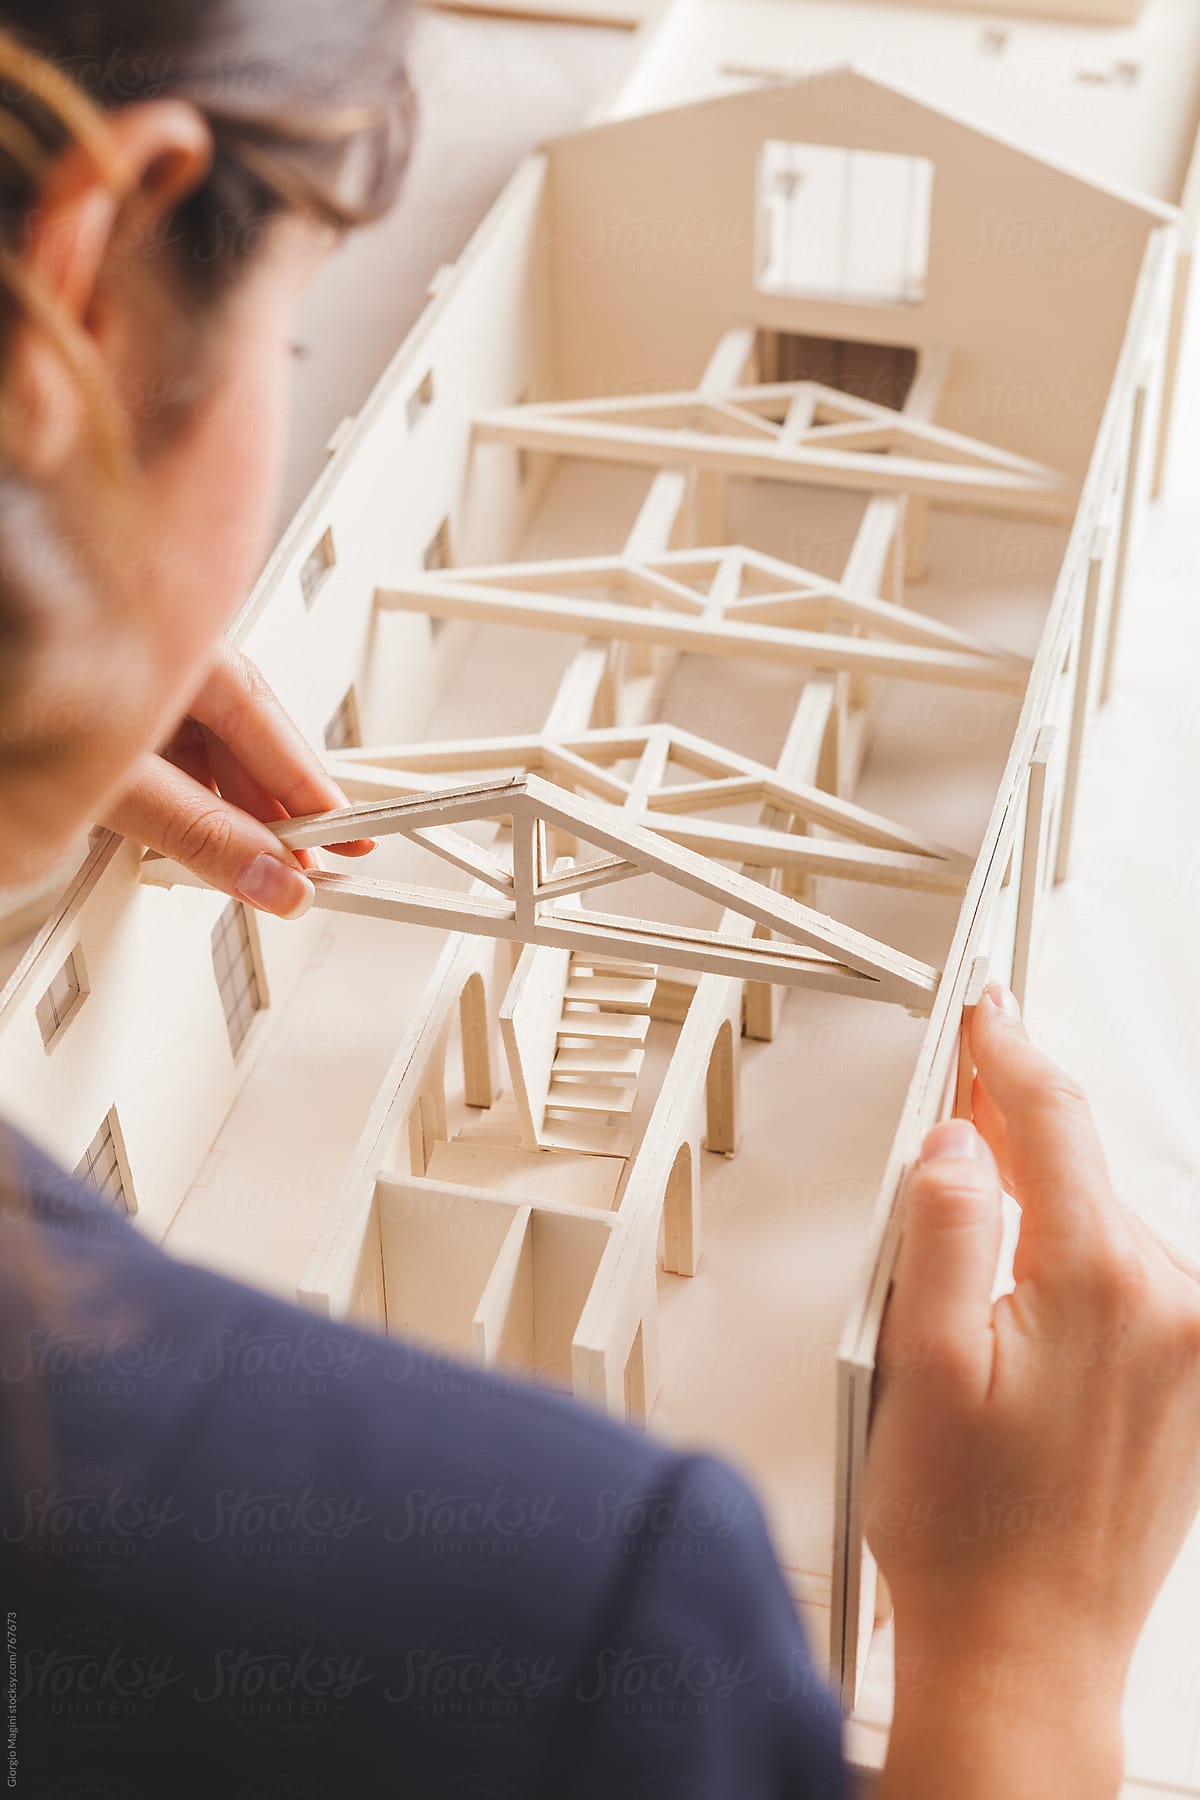 Architect Creating an Housing Model Made of Cardboard